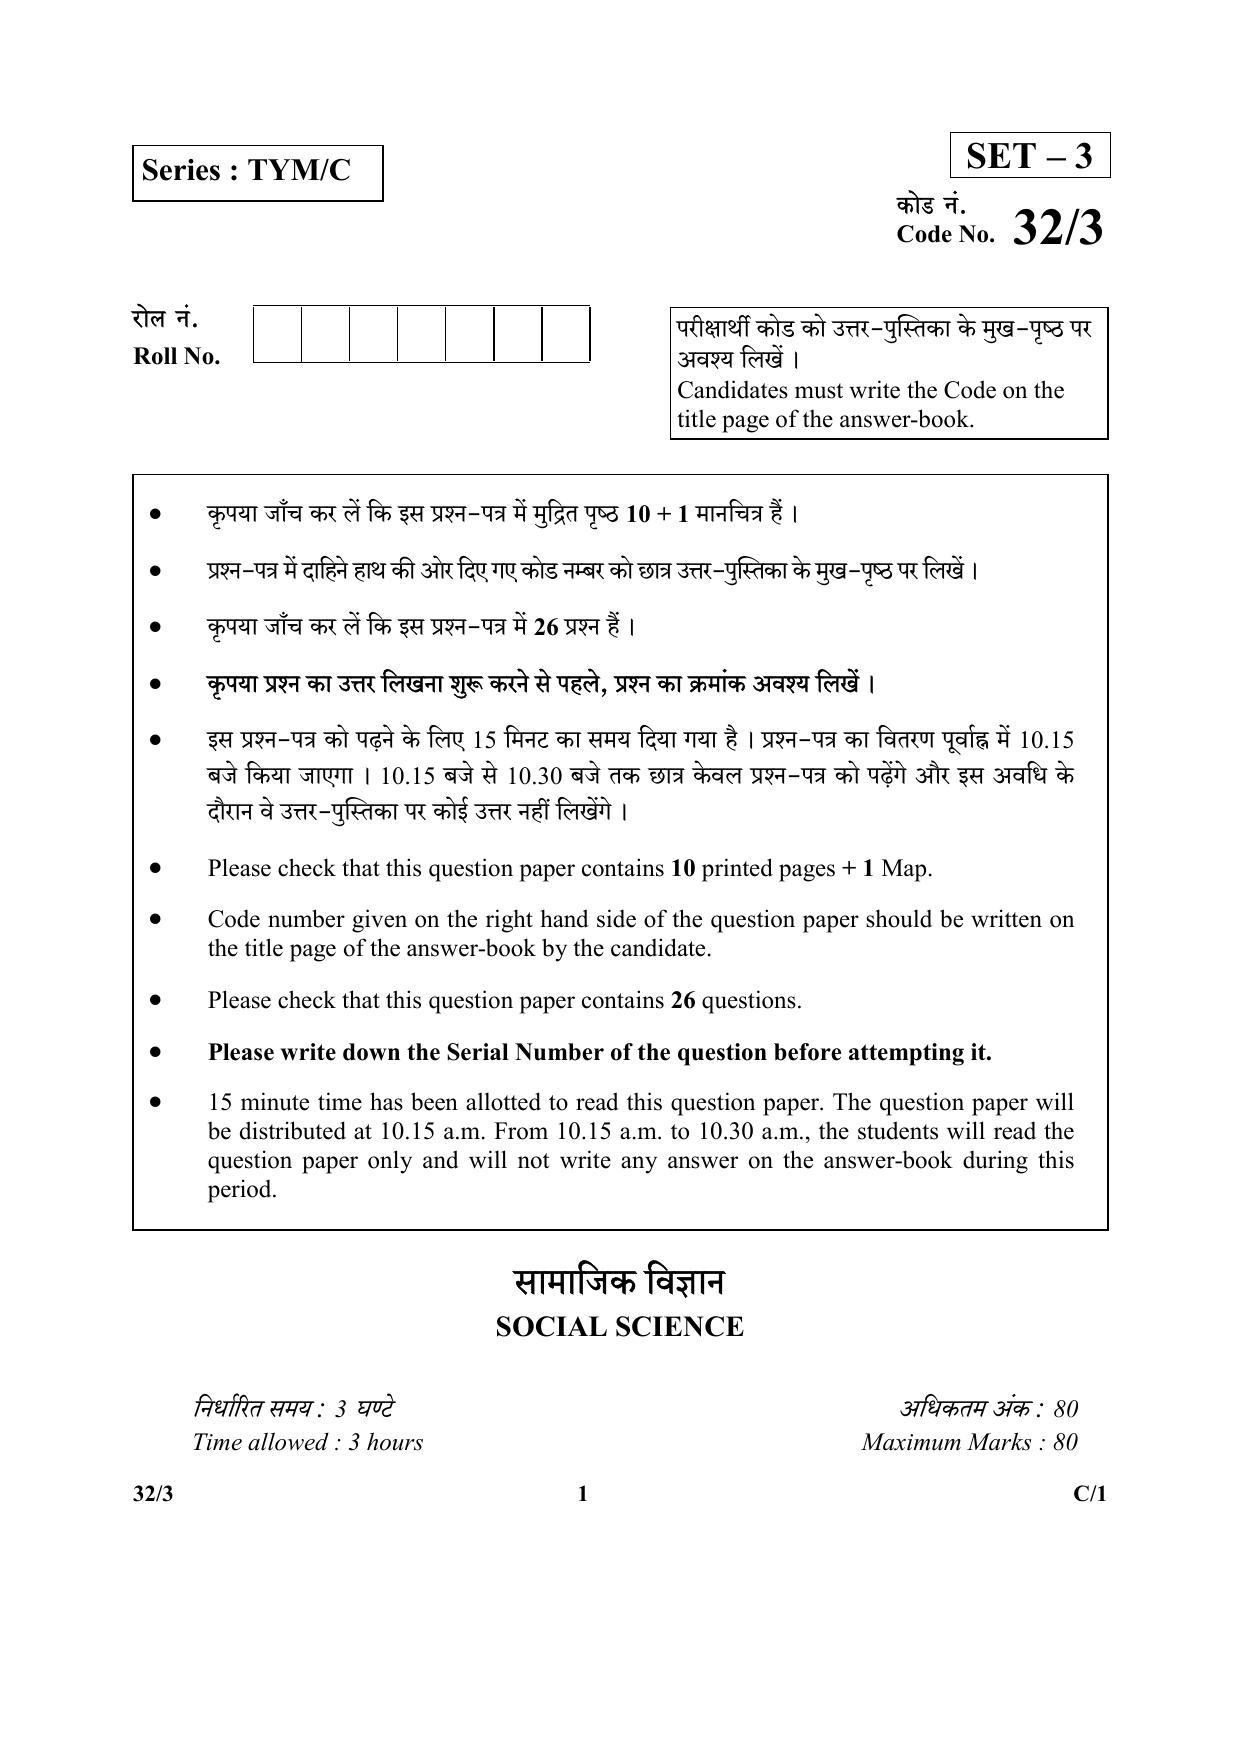 CBSE Class 10 32-3_Social Science 2018 Compartment Question Paper - Page 1